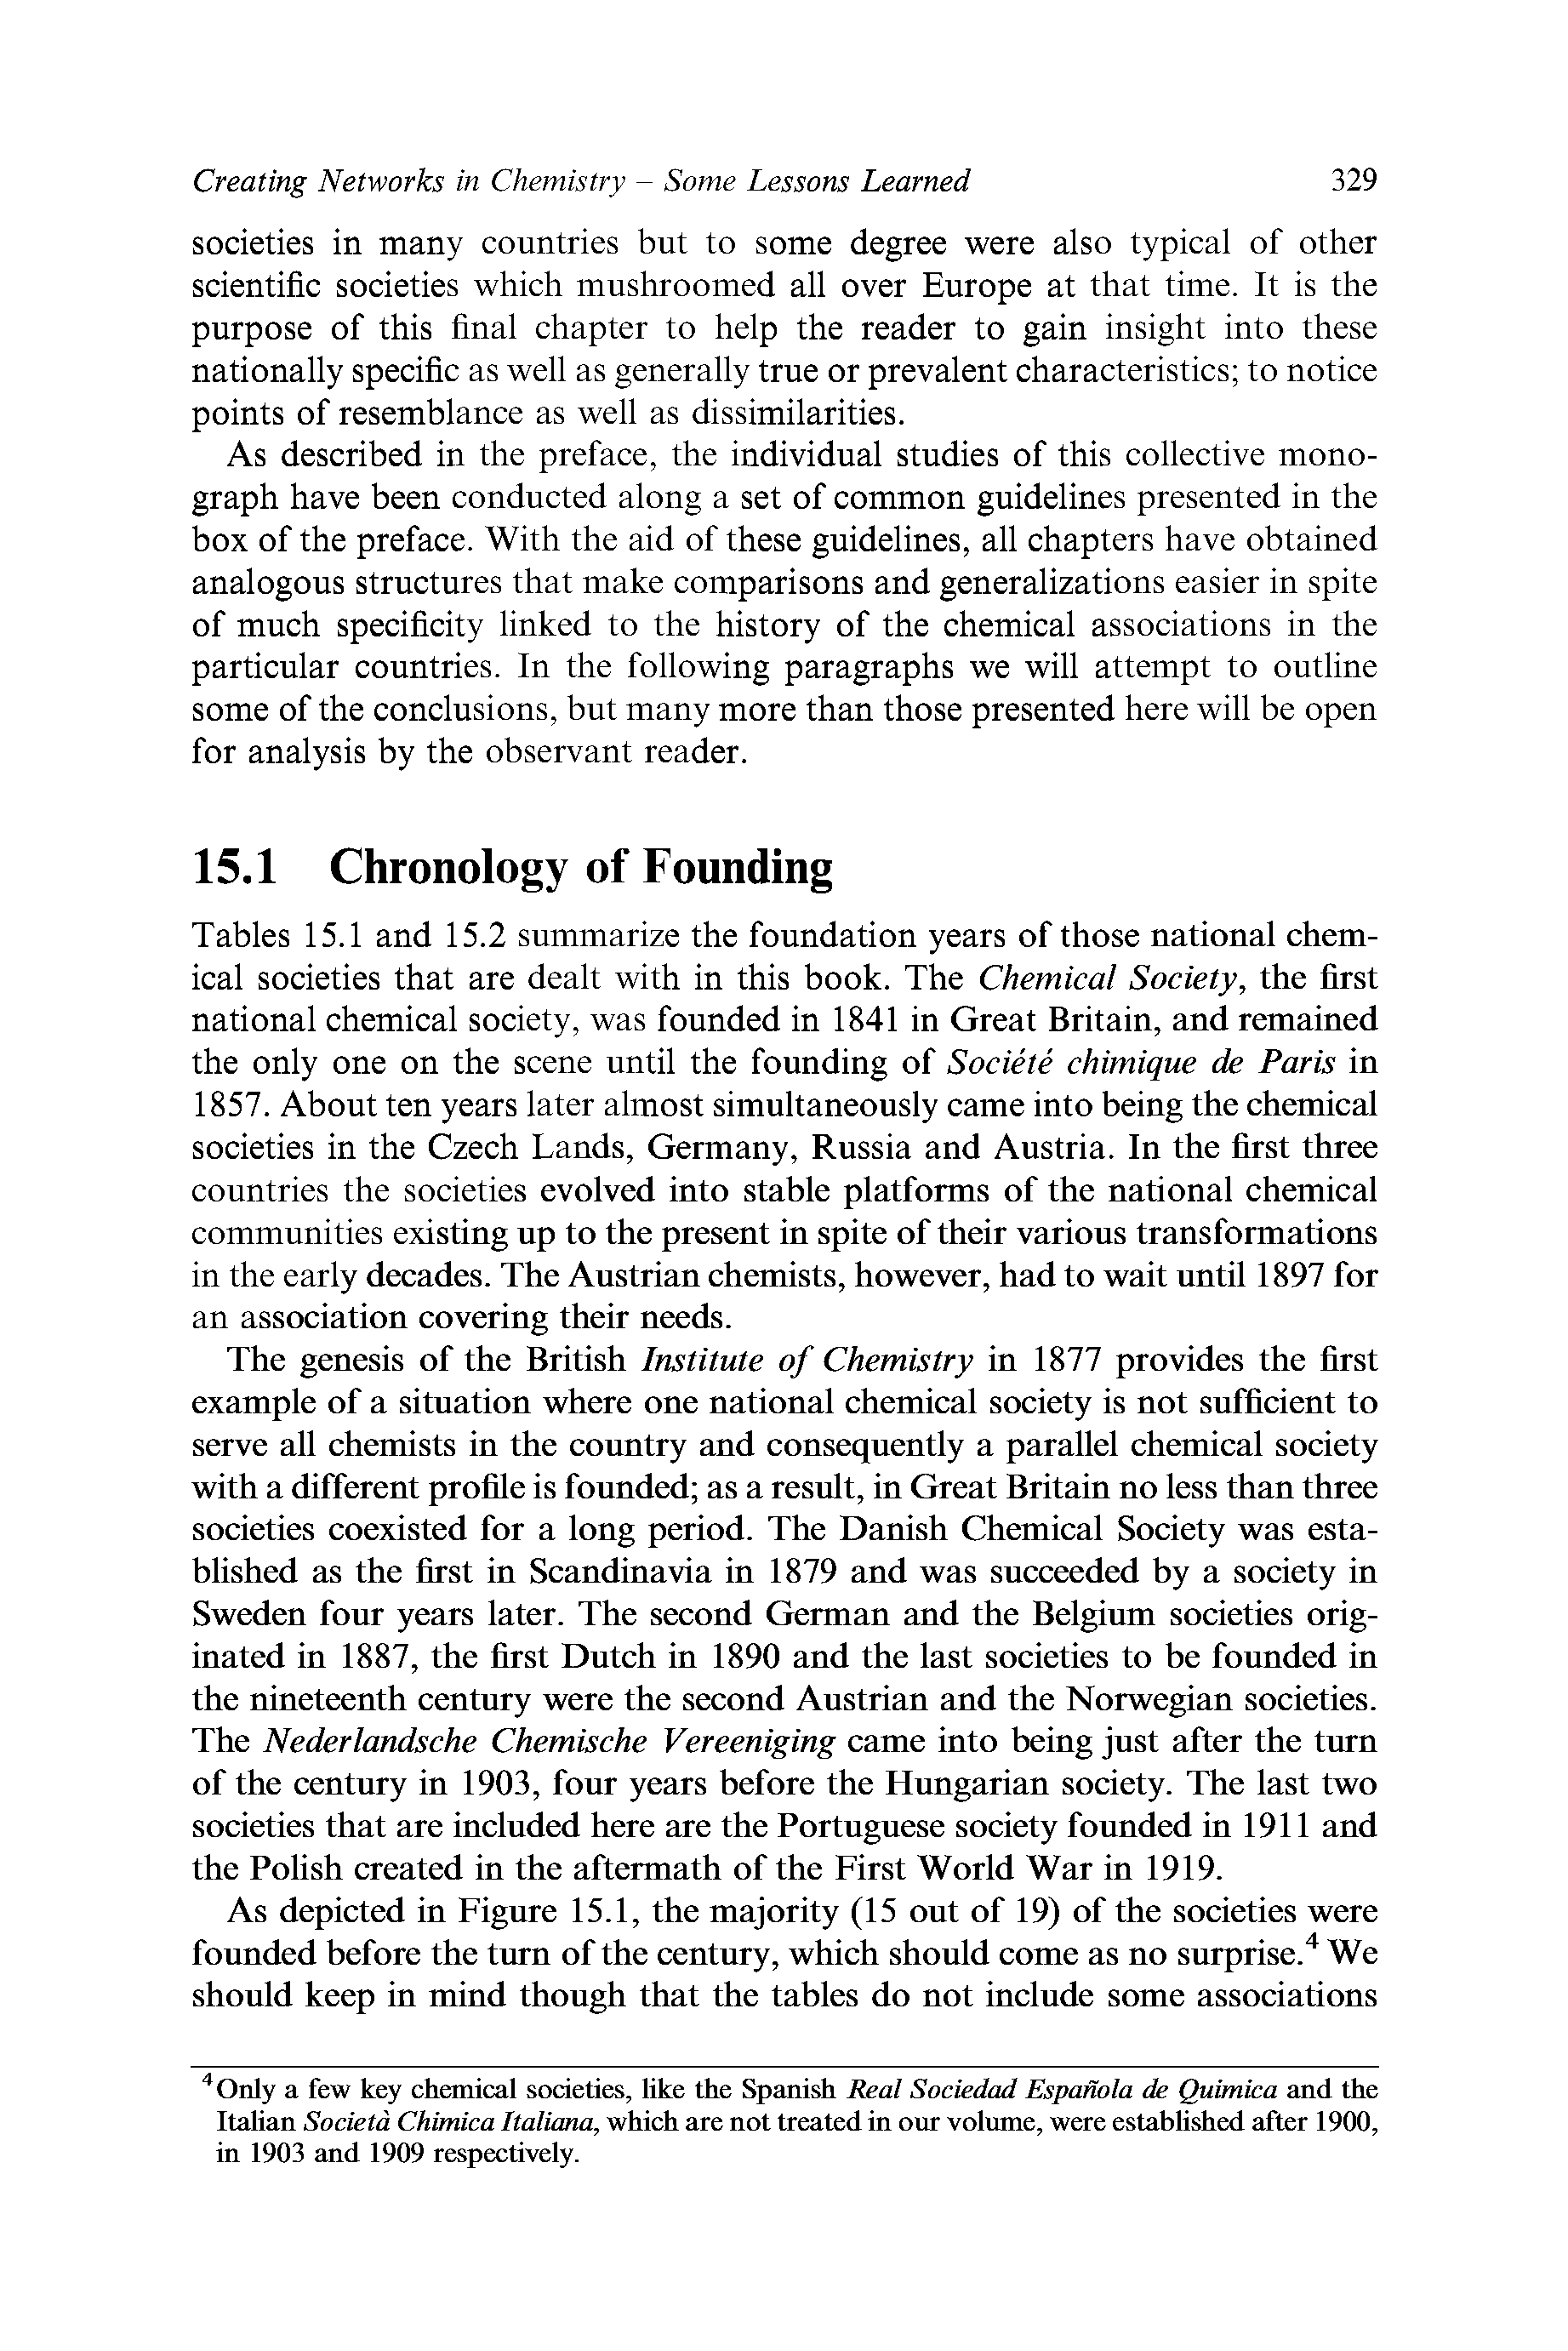 Tables 15.1 and 15.2 summarize the foundation years of those national chemical societies that are dealt with in this book. The Chemical Society, the first national chemical society, was founded in 1841 in Great Britain, and remained the only one on the scene until the founding of Societe chimique de Paris in 1857. About ten years later almost simultaneously came into being the chemical societies in the Czech Lands, Germany, Russia and Austria. In the first three countries the societies evolved into stable platforms of the national chemical communities existing up to the present in spite of their various transformations in the early deeades. The Austrian chemists, however, had to wait until 1897 for an association covering their needs.